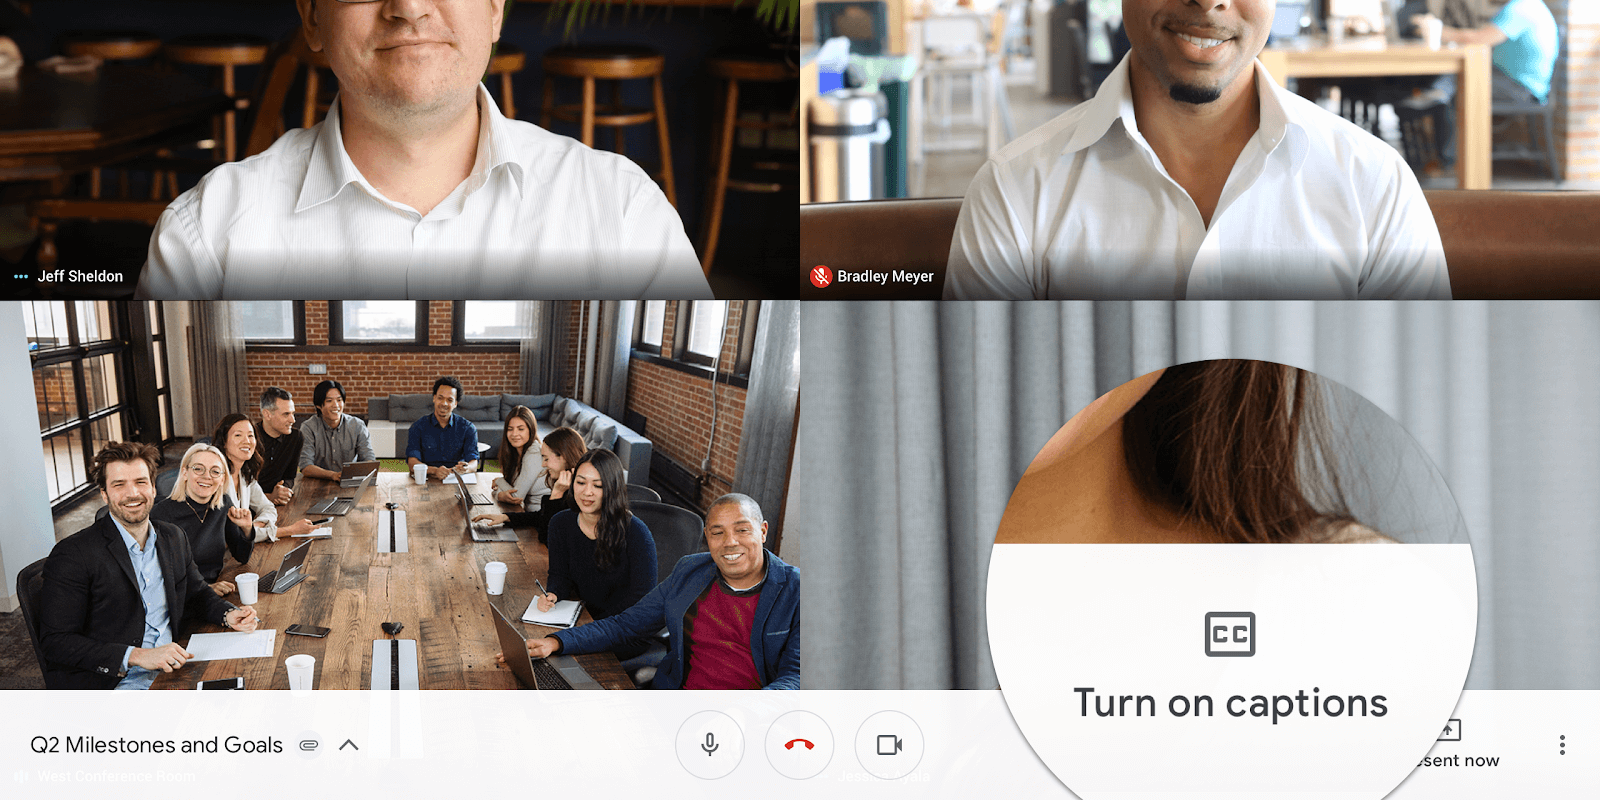 Google hangouts now being renamed as Google Meet is one of the best alternatives for Zoom